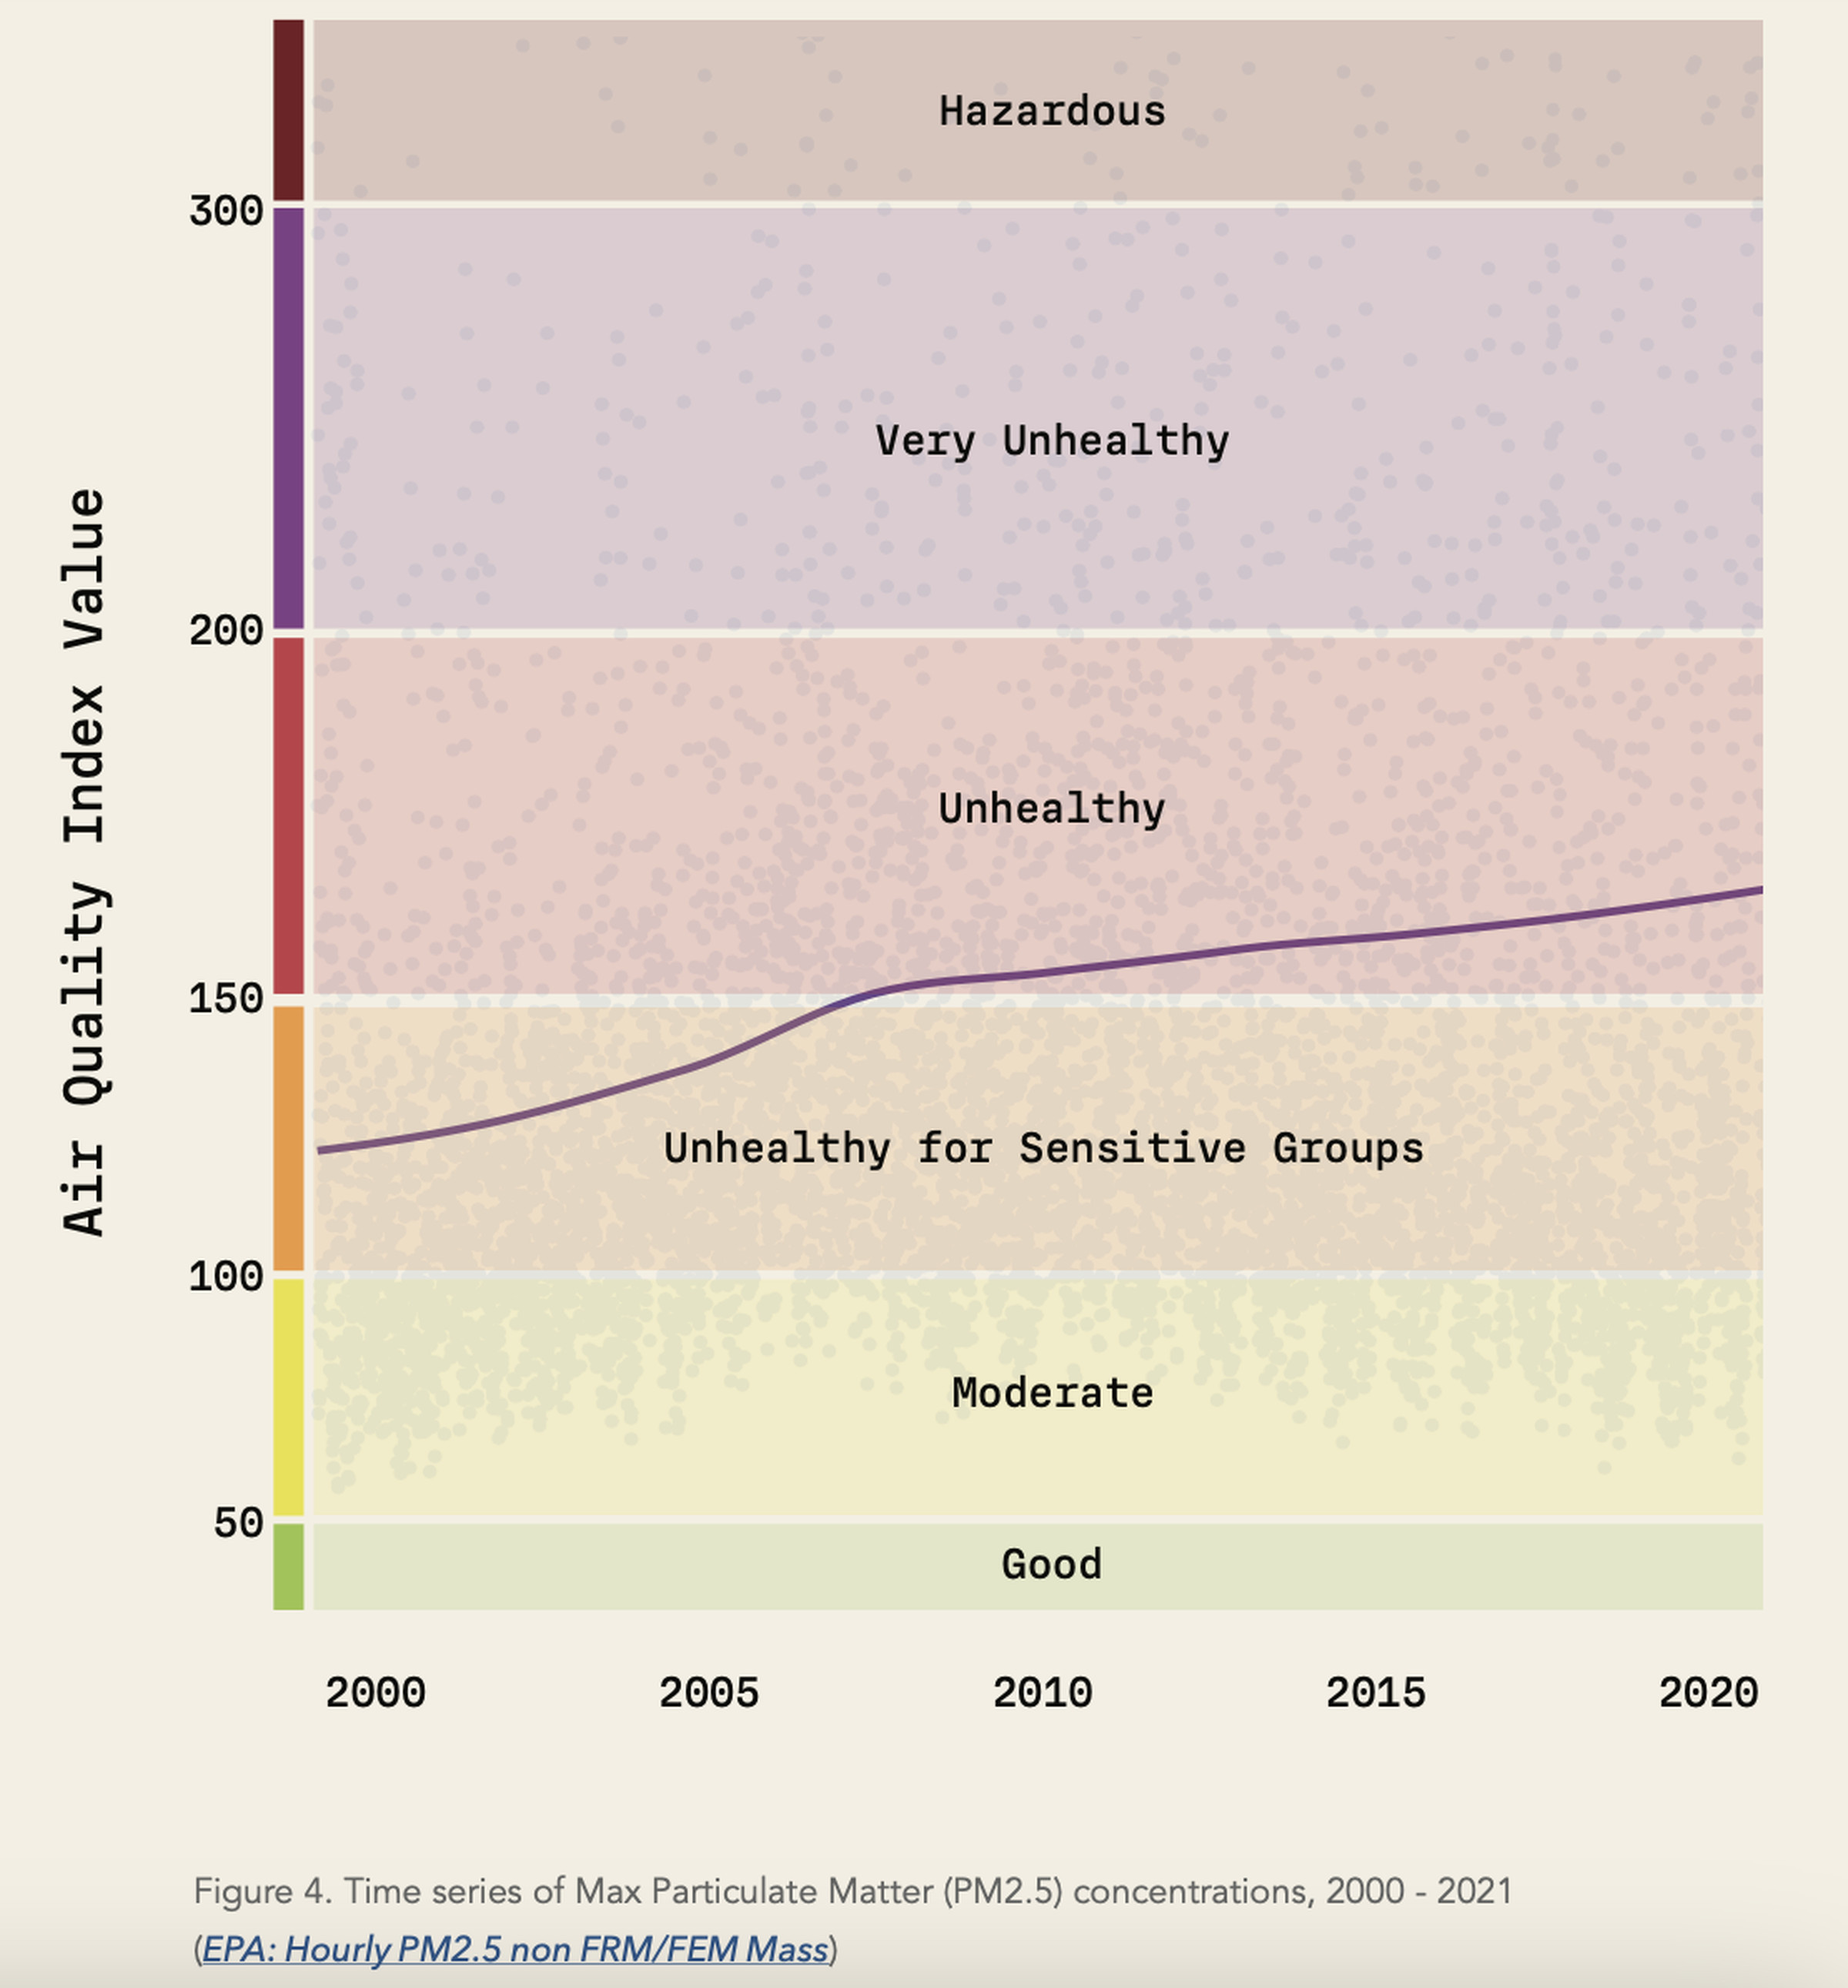 A graph shows a timeline from 2000 to 2021 on the X axis. On the Y axis, the Air Quality Index rises from “Good” to “Moderate” to “Unhealthy for Sensitive Groups” to “Unhealthy” to “Very Unhealthy to “Hazardous.” A line across the graph shows average maximum values for fine particle pollution rising from the range of “unhealthy for sensitive groups to “unhealthy.”